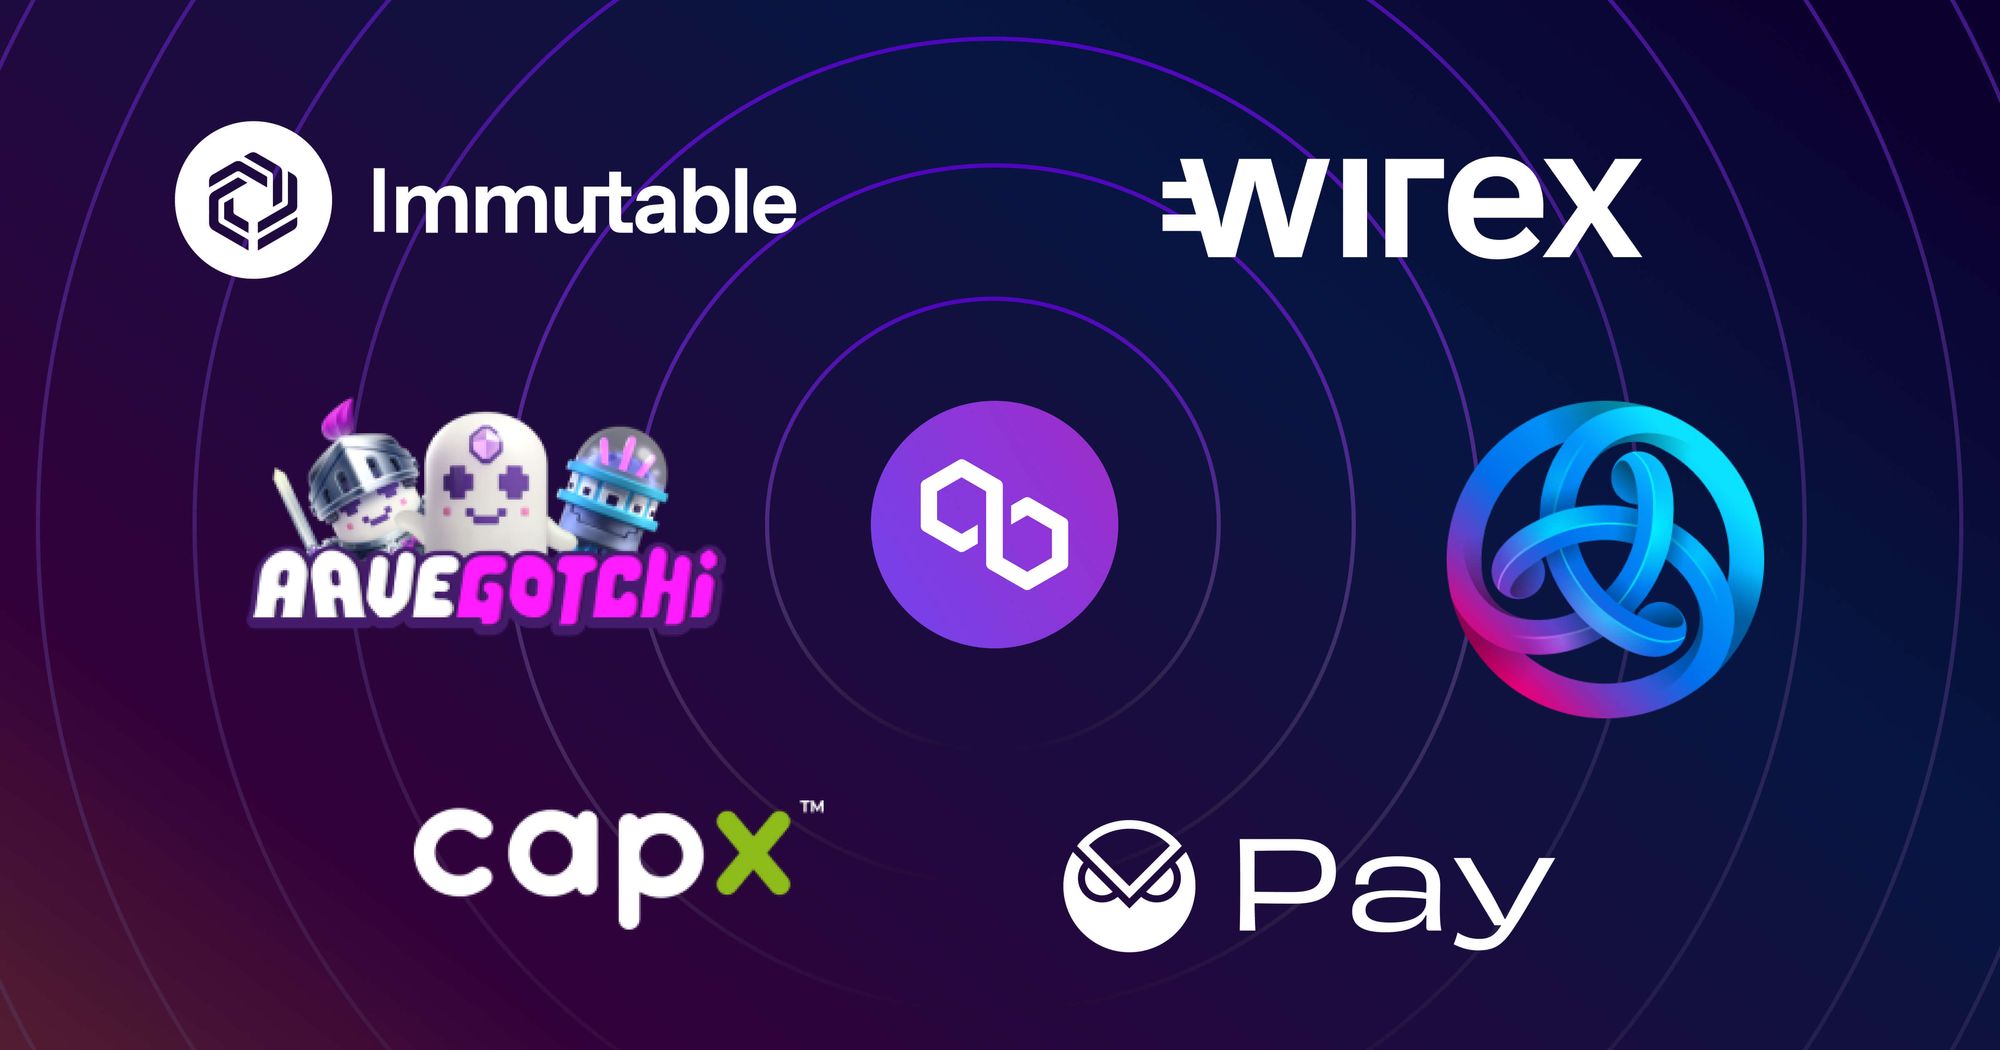 Wirex and Polygon CDK Join Forces to Revolutionize Digital